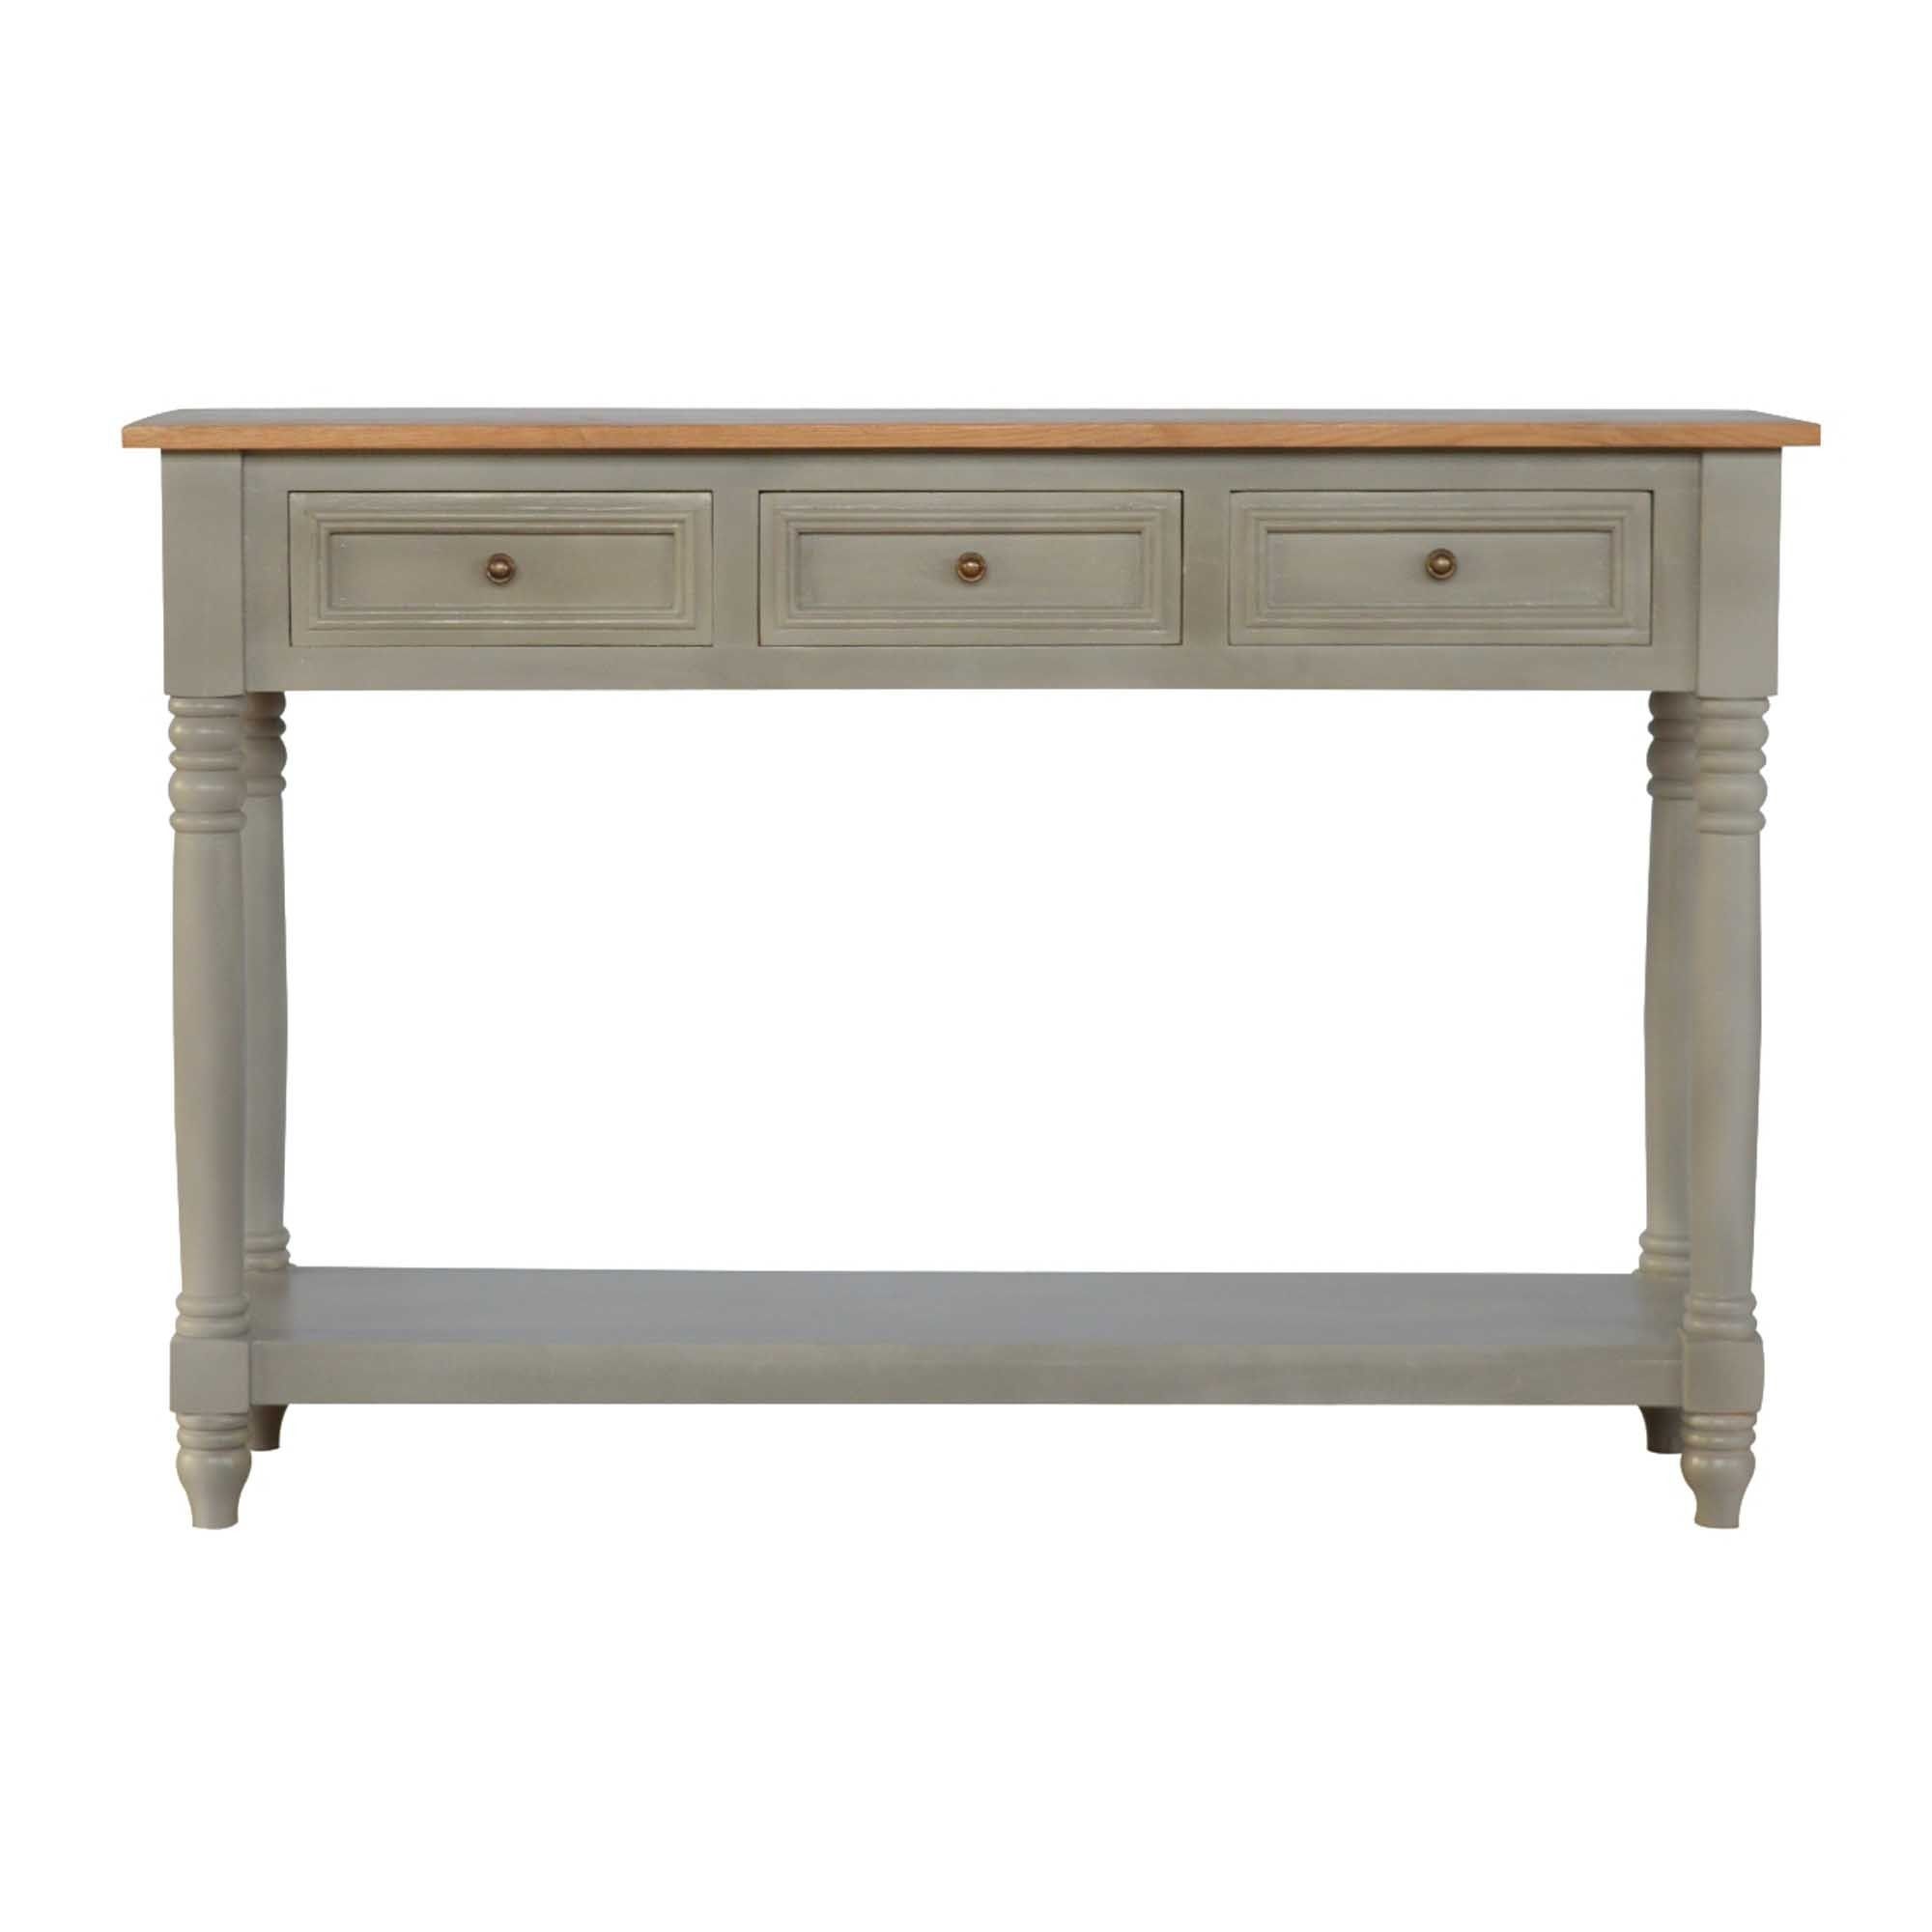 Grey Painted Console Table With Turned Legs | Lounge | Console Tables Inside Gray And Gold Console Tables (View 14 of 20)